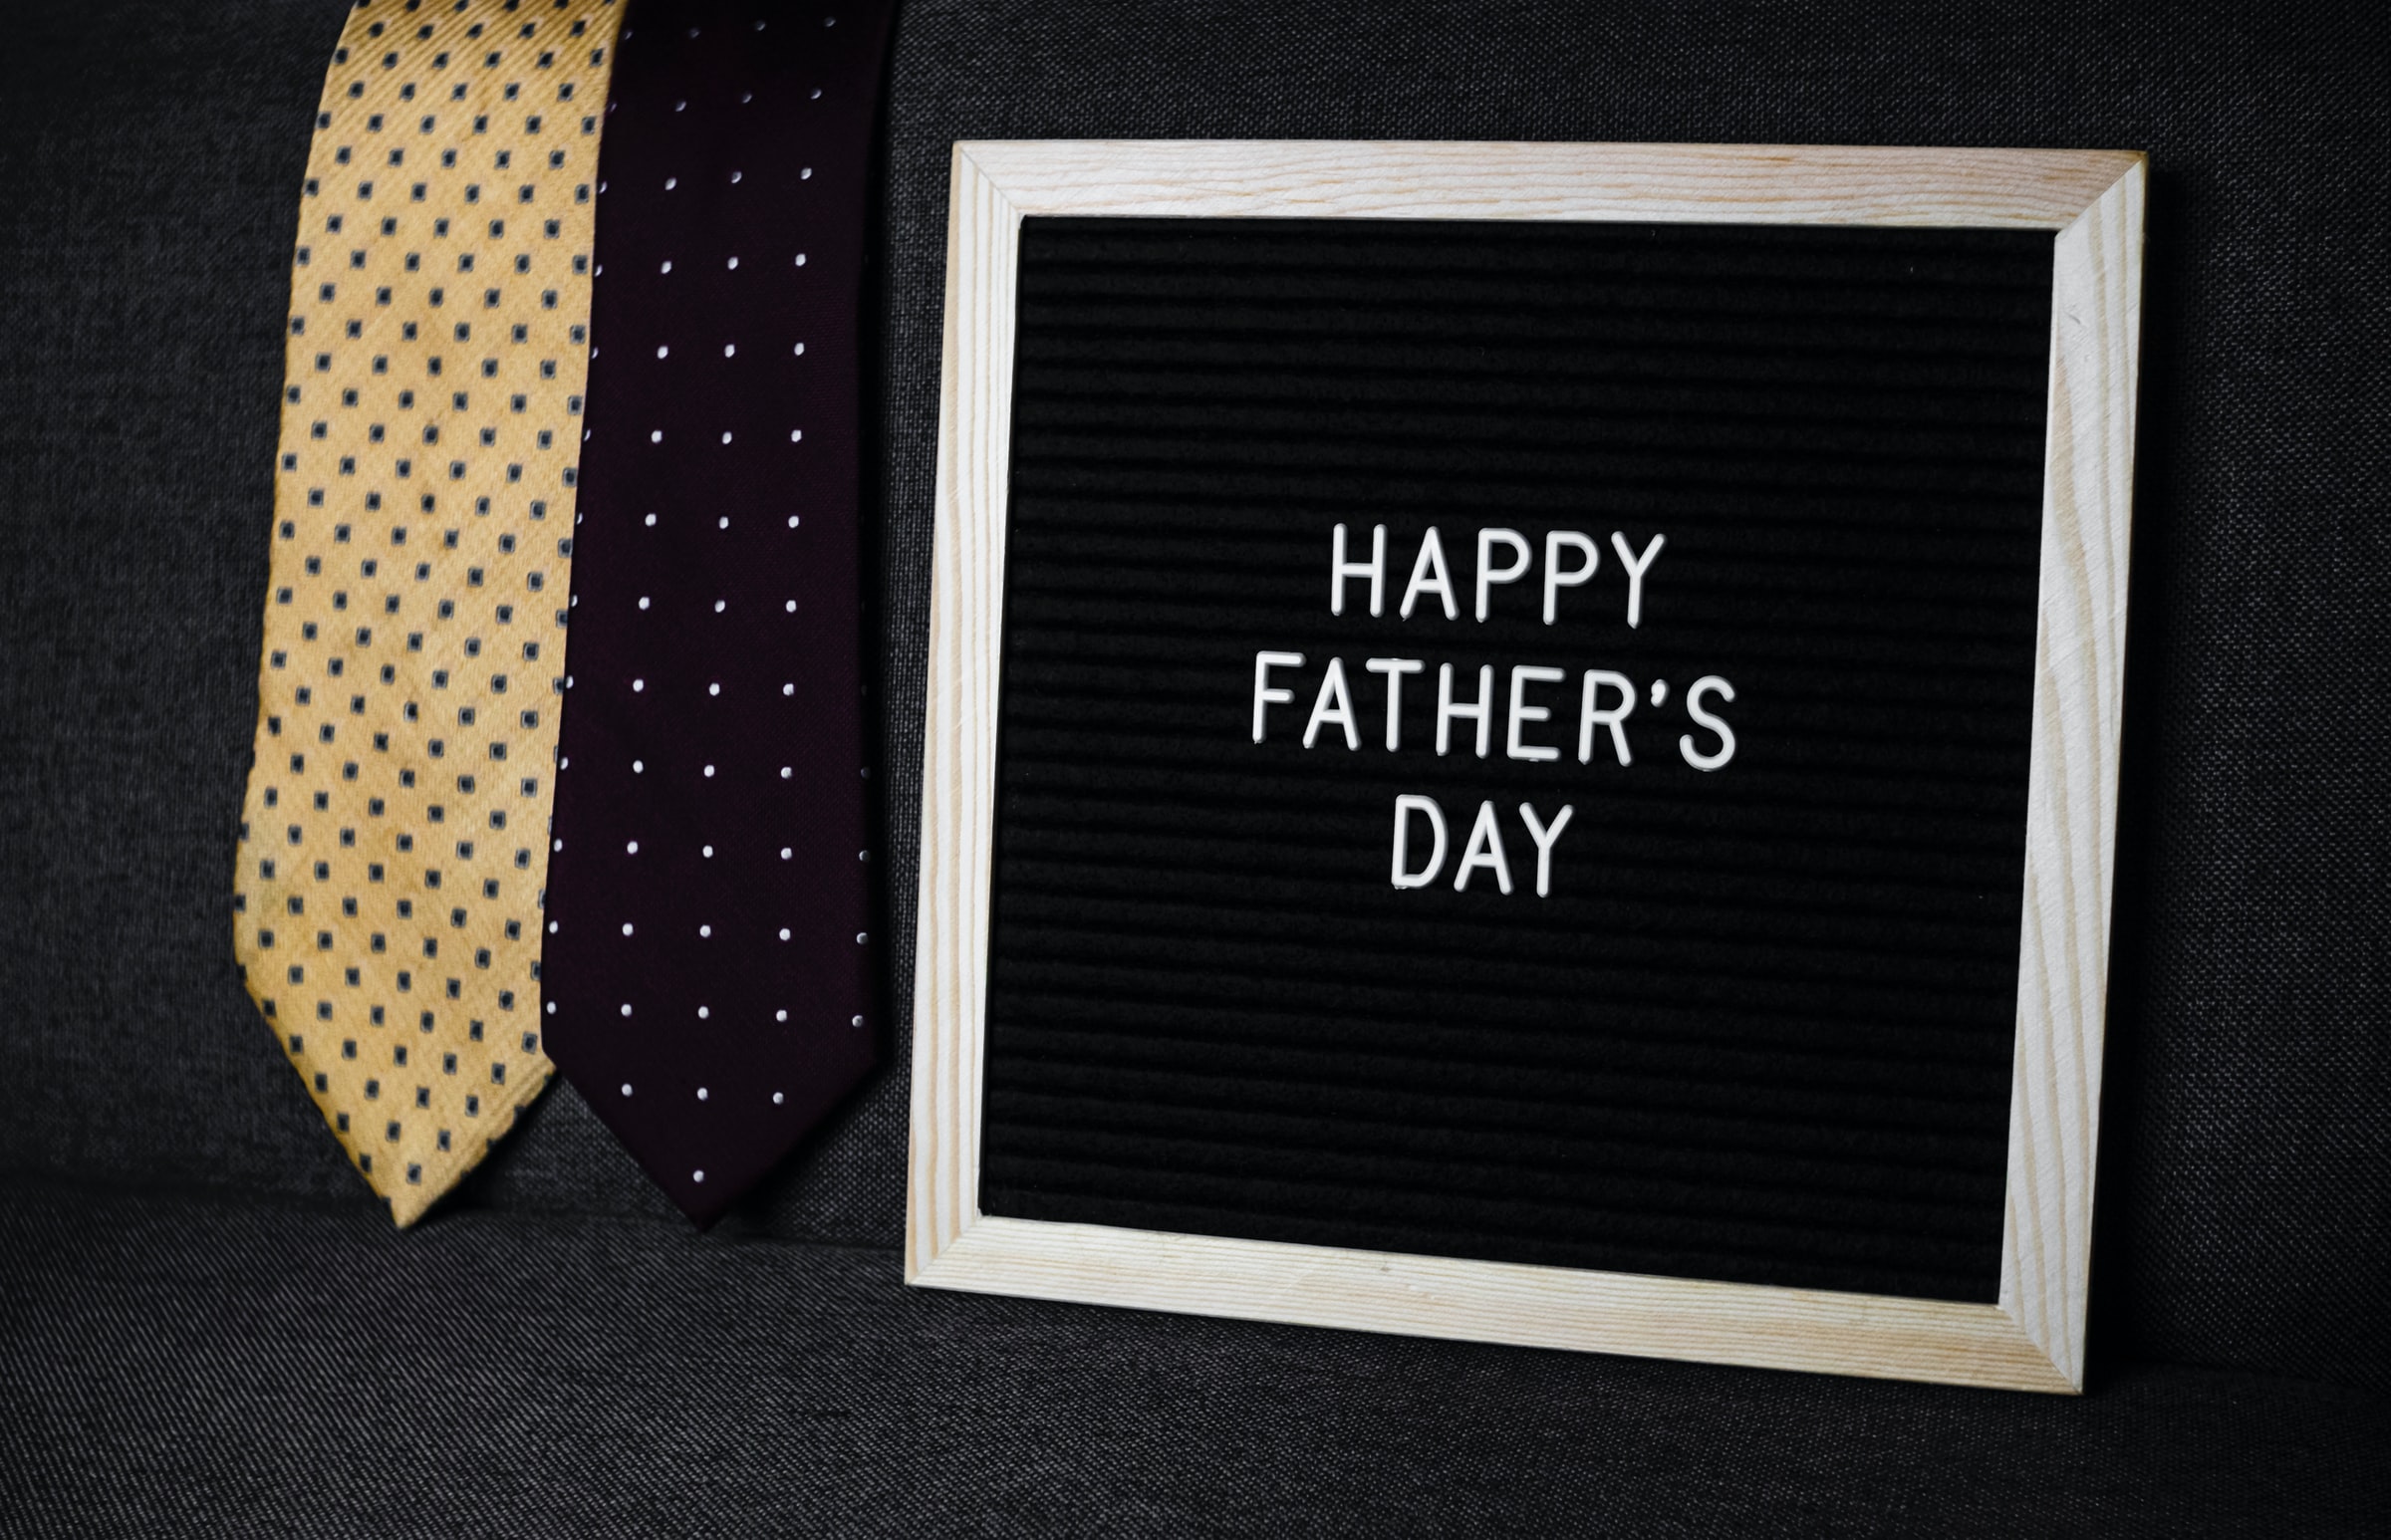 Give Love To Dad With The Special BHS Father's Day Promo